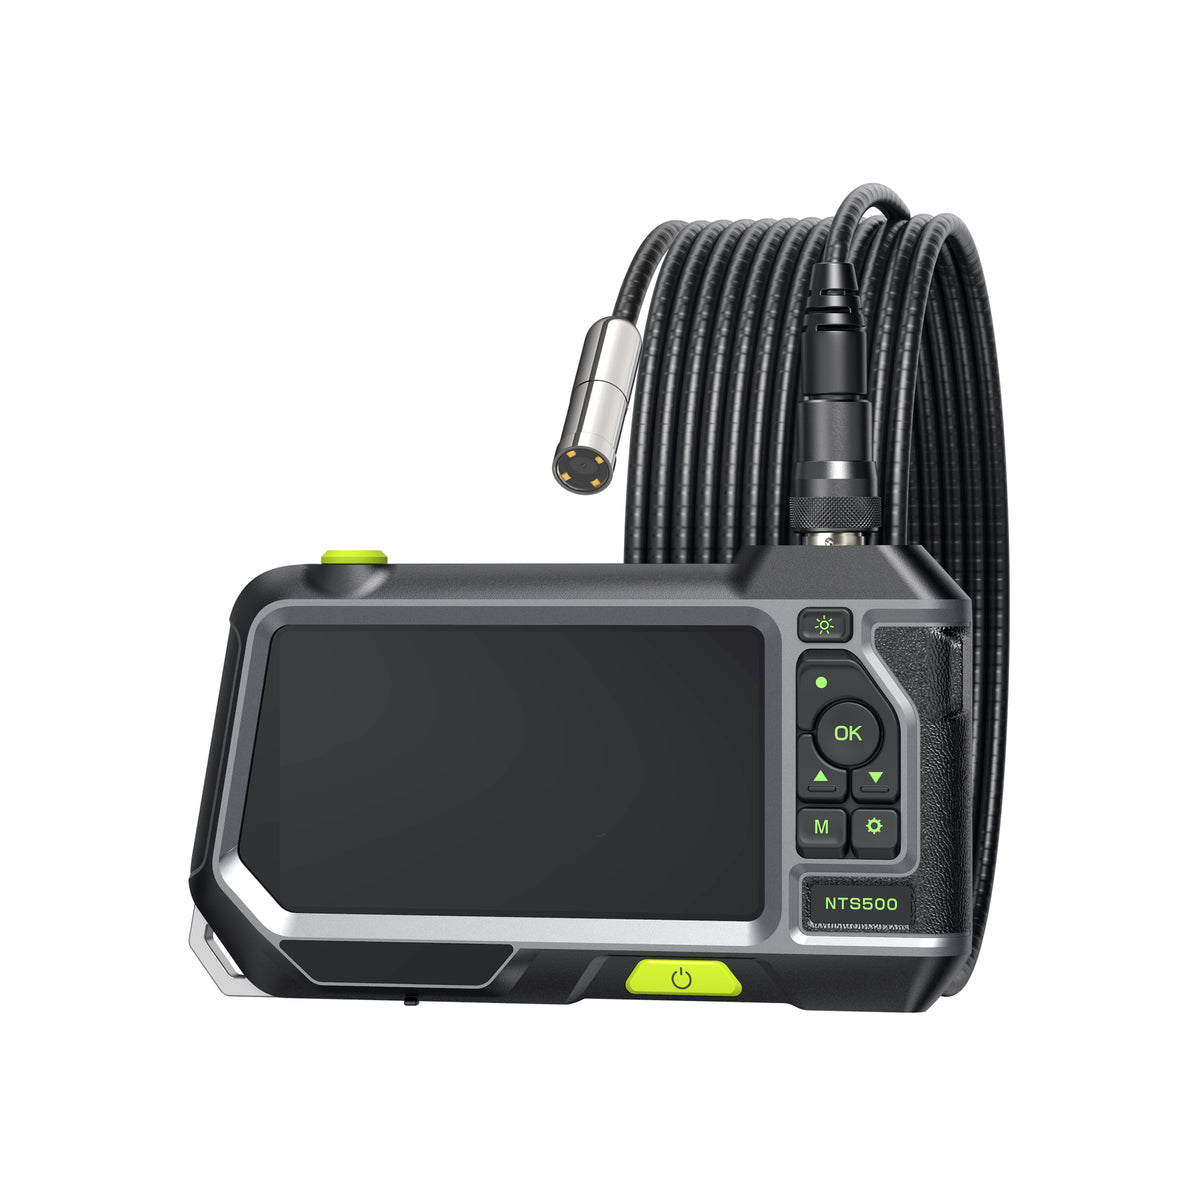 Teslong Dual Lens Endoscope, Inspection Camera with 5' Monitor